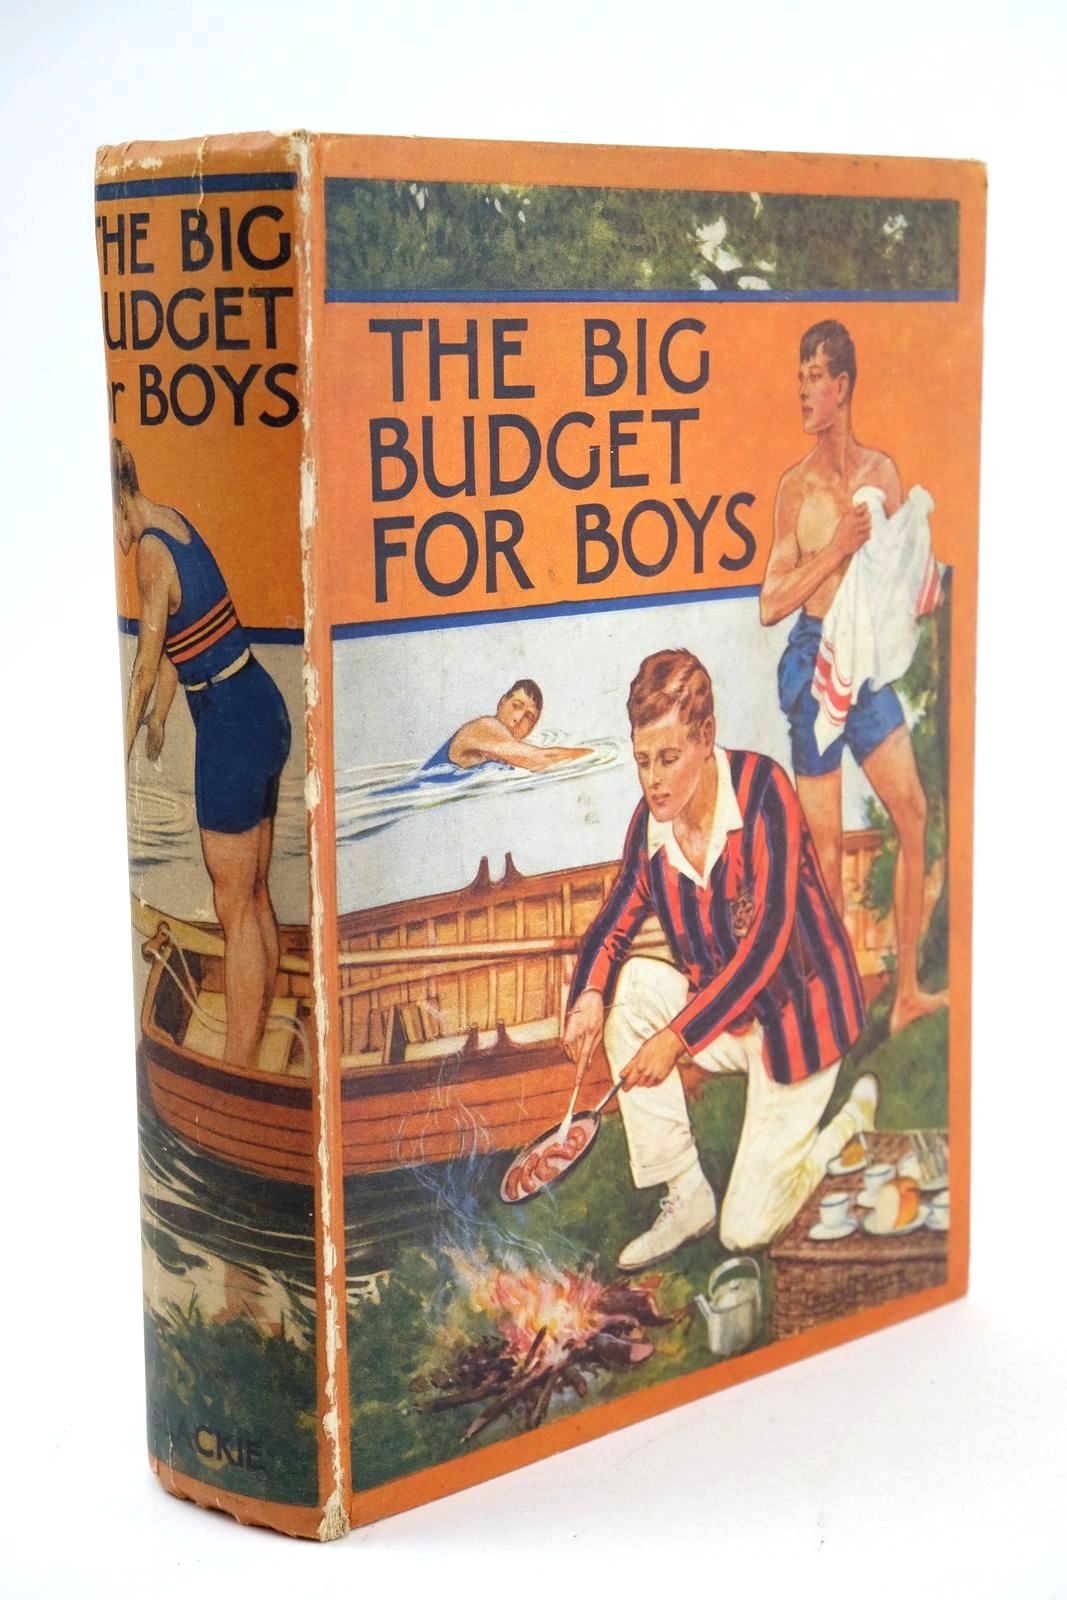 Photo of THE BIG BUDGET FOR BOYS written by Pennant, Jim
Westerman, Percy F.
Rutley, C. Bernard
et al, illustrated by Brock, R.H.
Trotter, A. Mason
et al., published by Blackie & Son Ltd. (STOCK CODE: 1325132)  for sale by Stella & Rose's Books